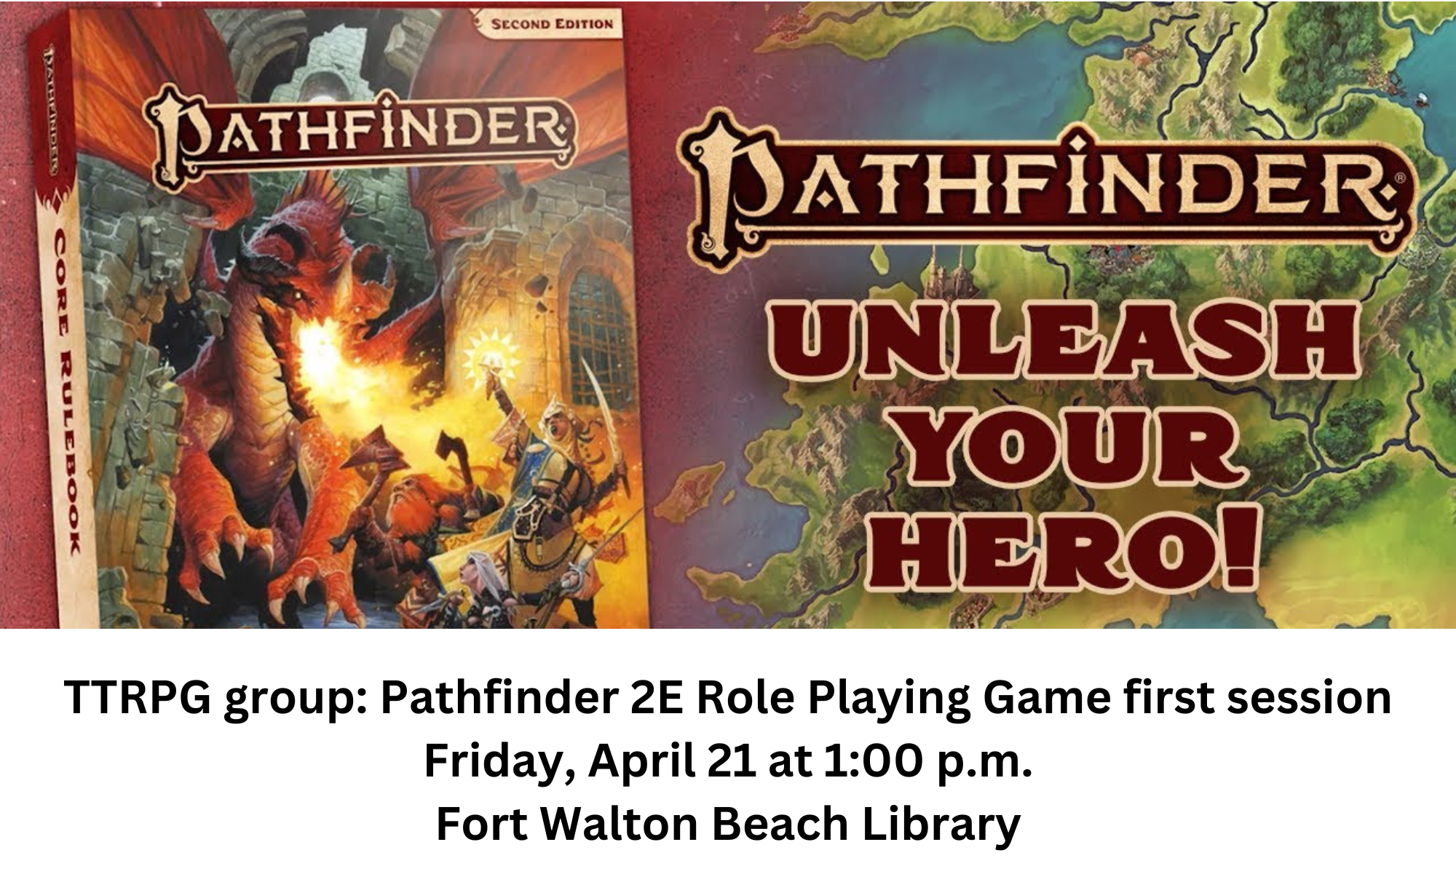 Tabletop Role-playing Gaming group - Pathfinder 2E